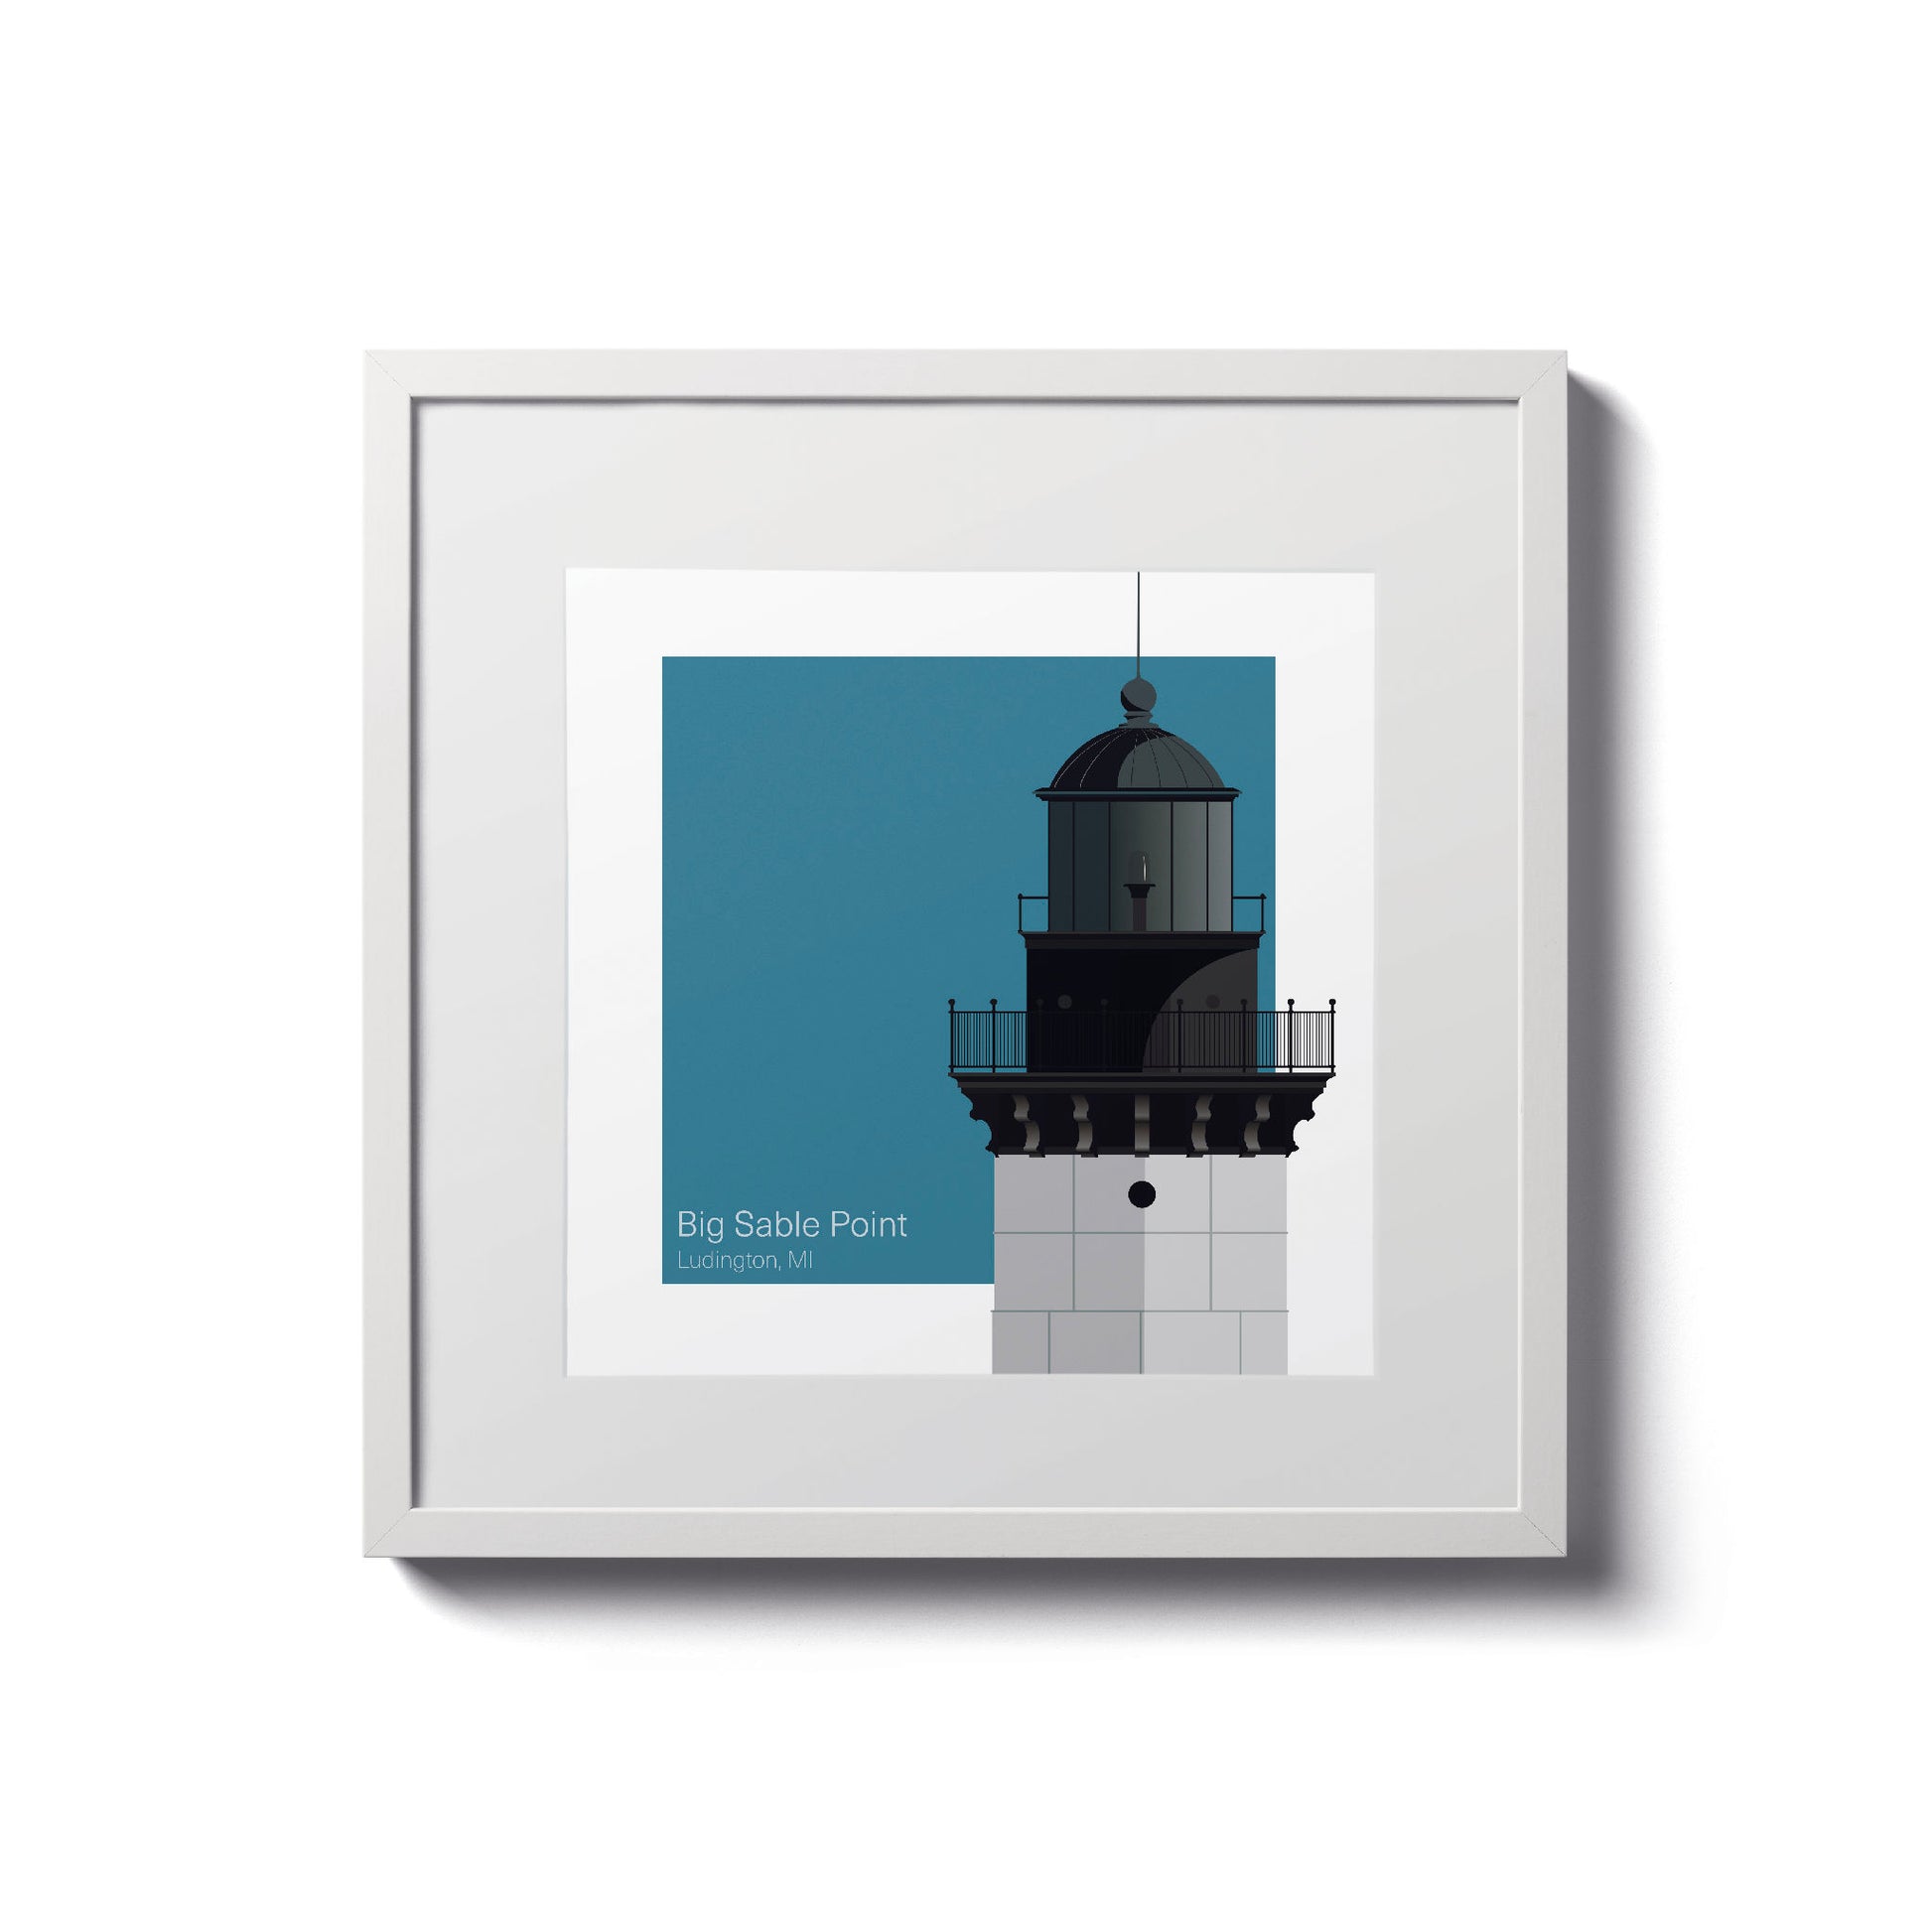 Illustration of the Big Sable Point lighthouse, MI, USA. On a white background with aqua blue square as a backdrop., in a white frame  and measuring 8"x8" (20x20cm).